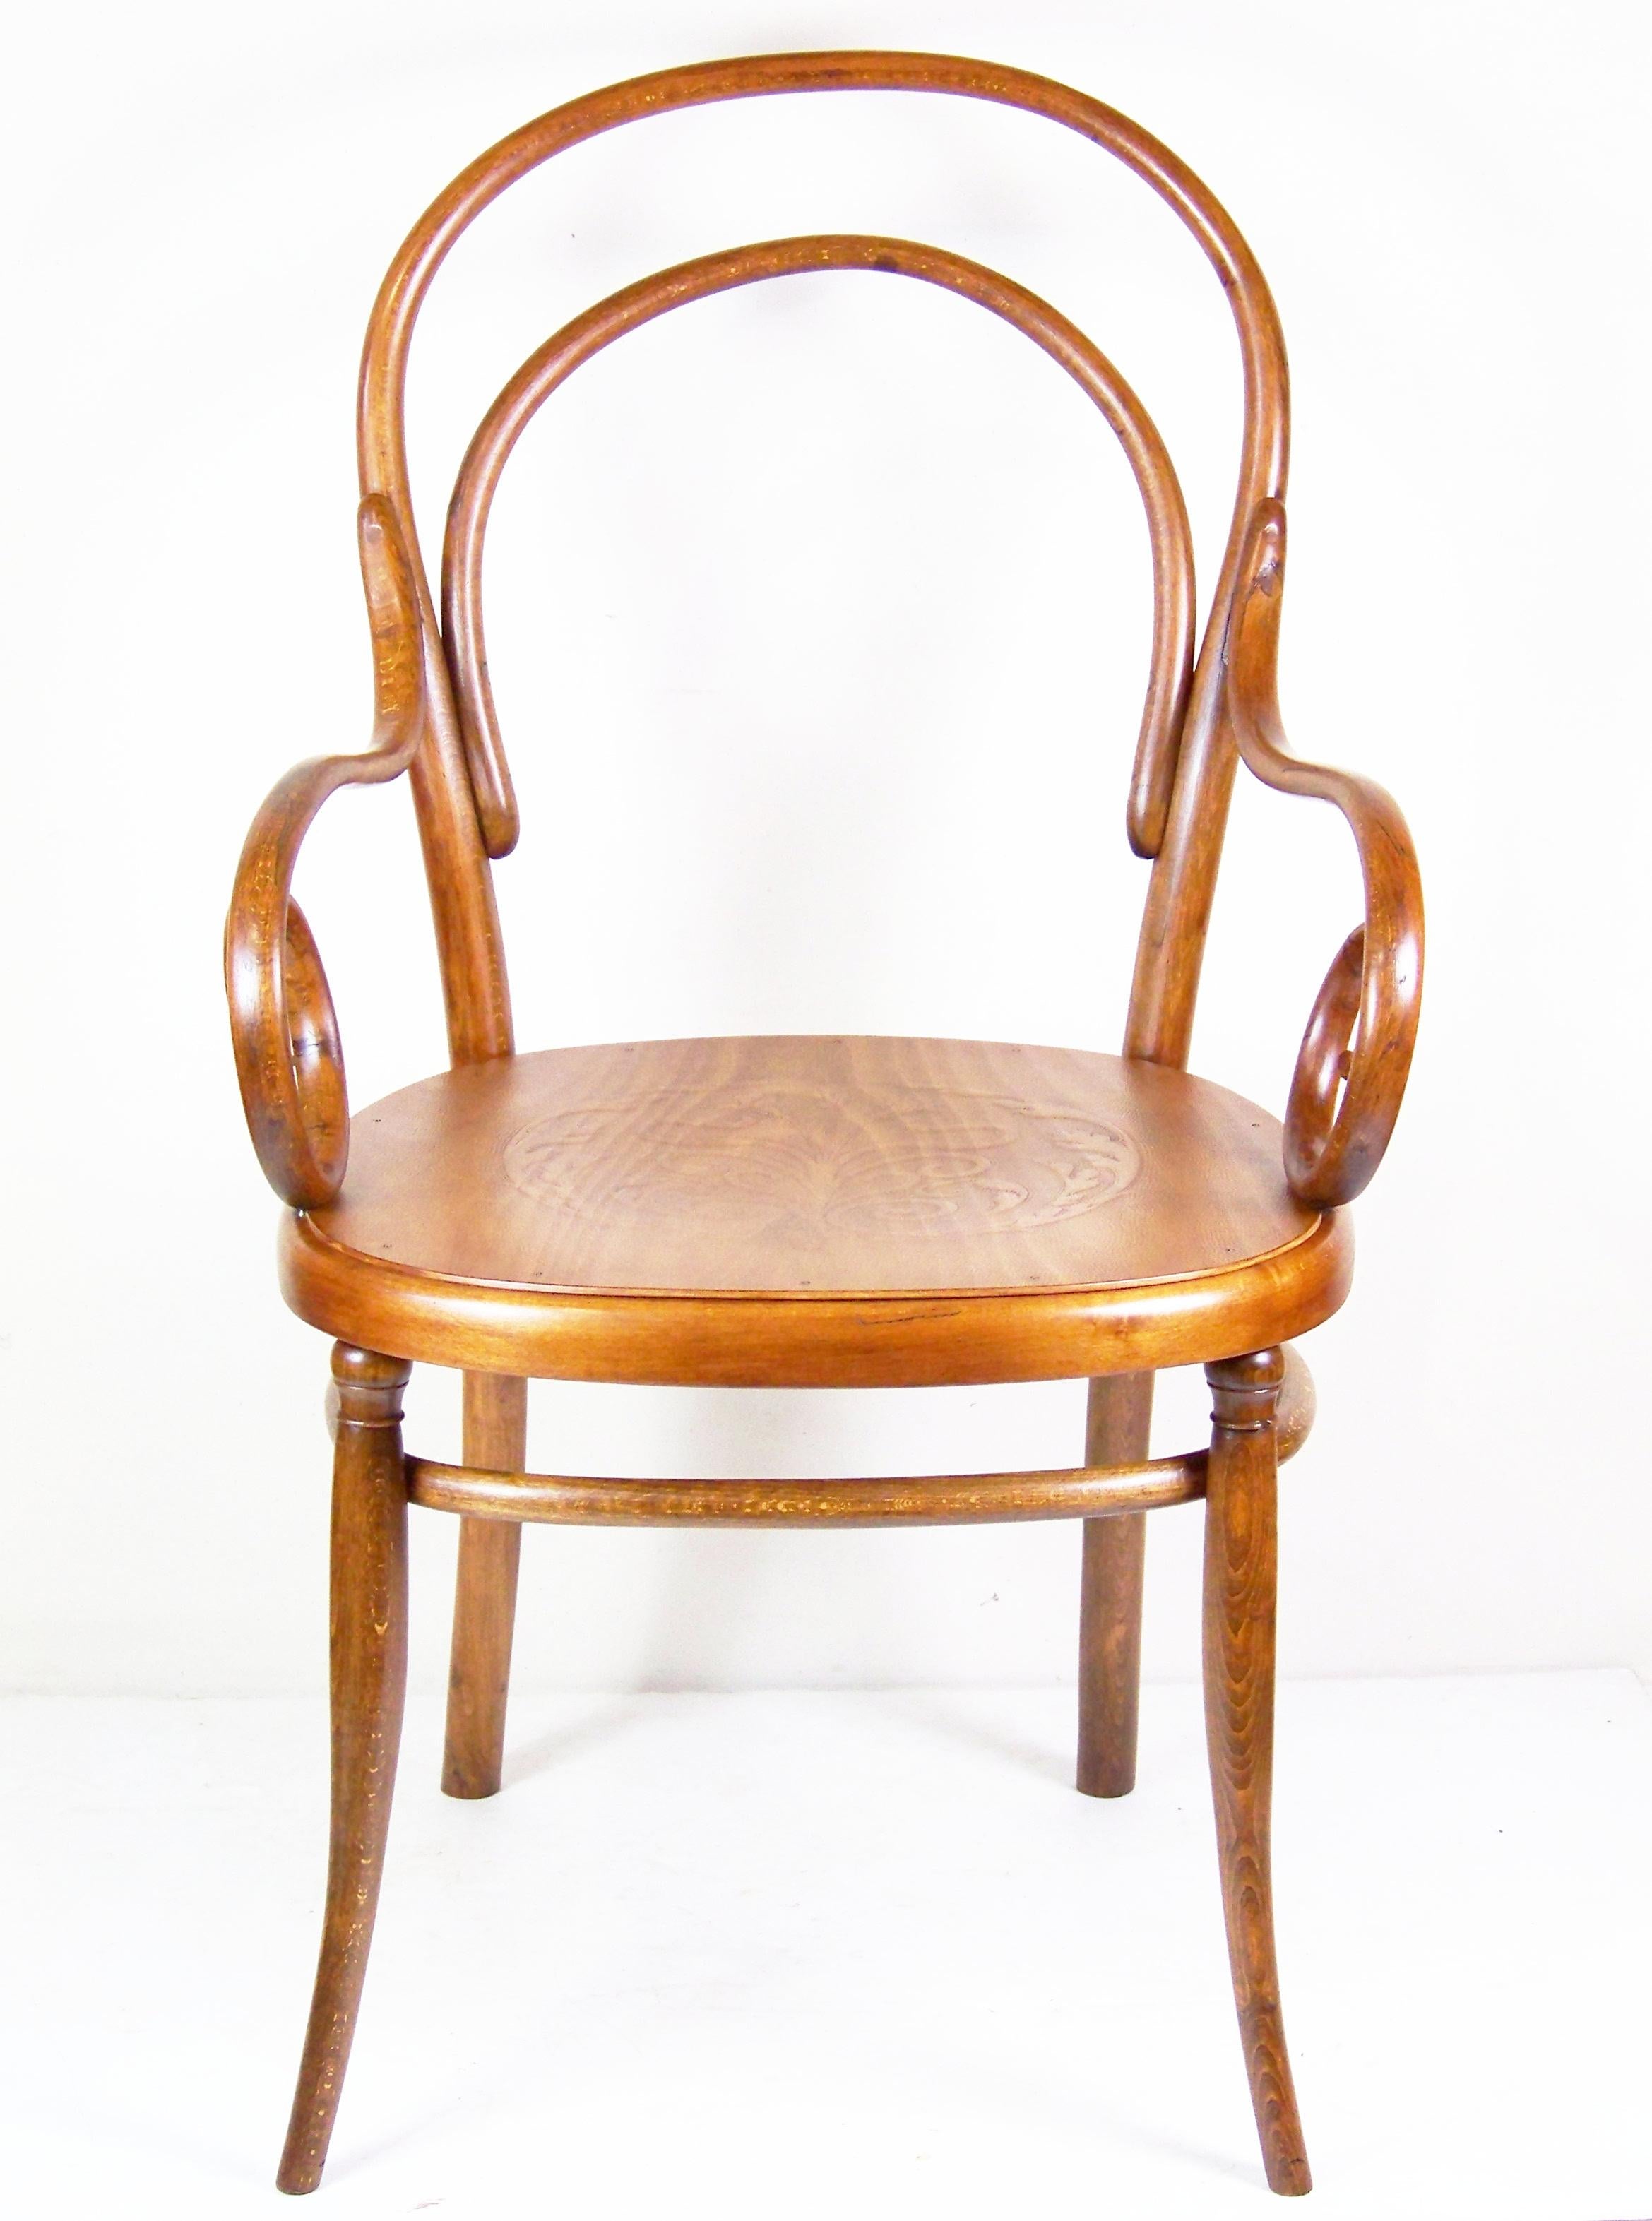 Very old armchair from the beginnings of the production of bentwood furniture. These were always very subtle and simple. The bayonet fastening of the armrests to the backrest also indicates the early production, this can only be seen in products